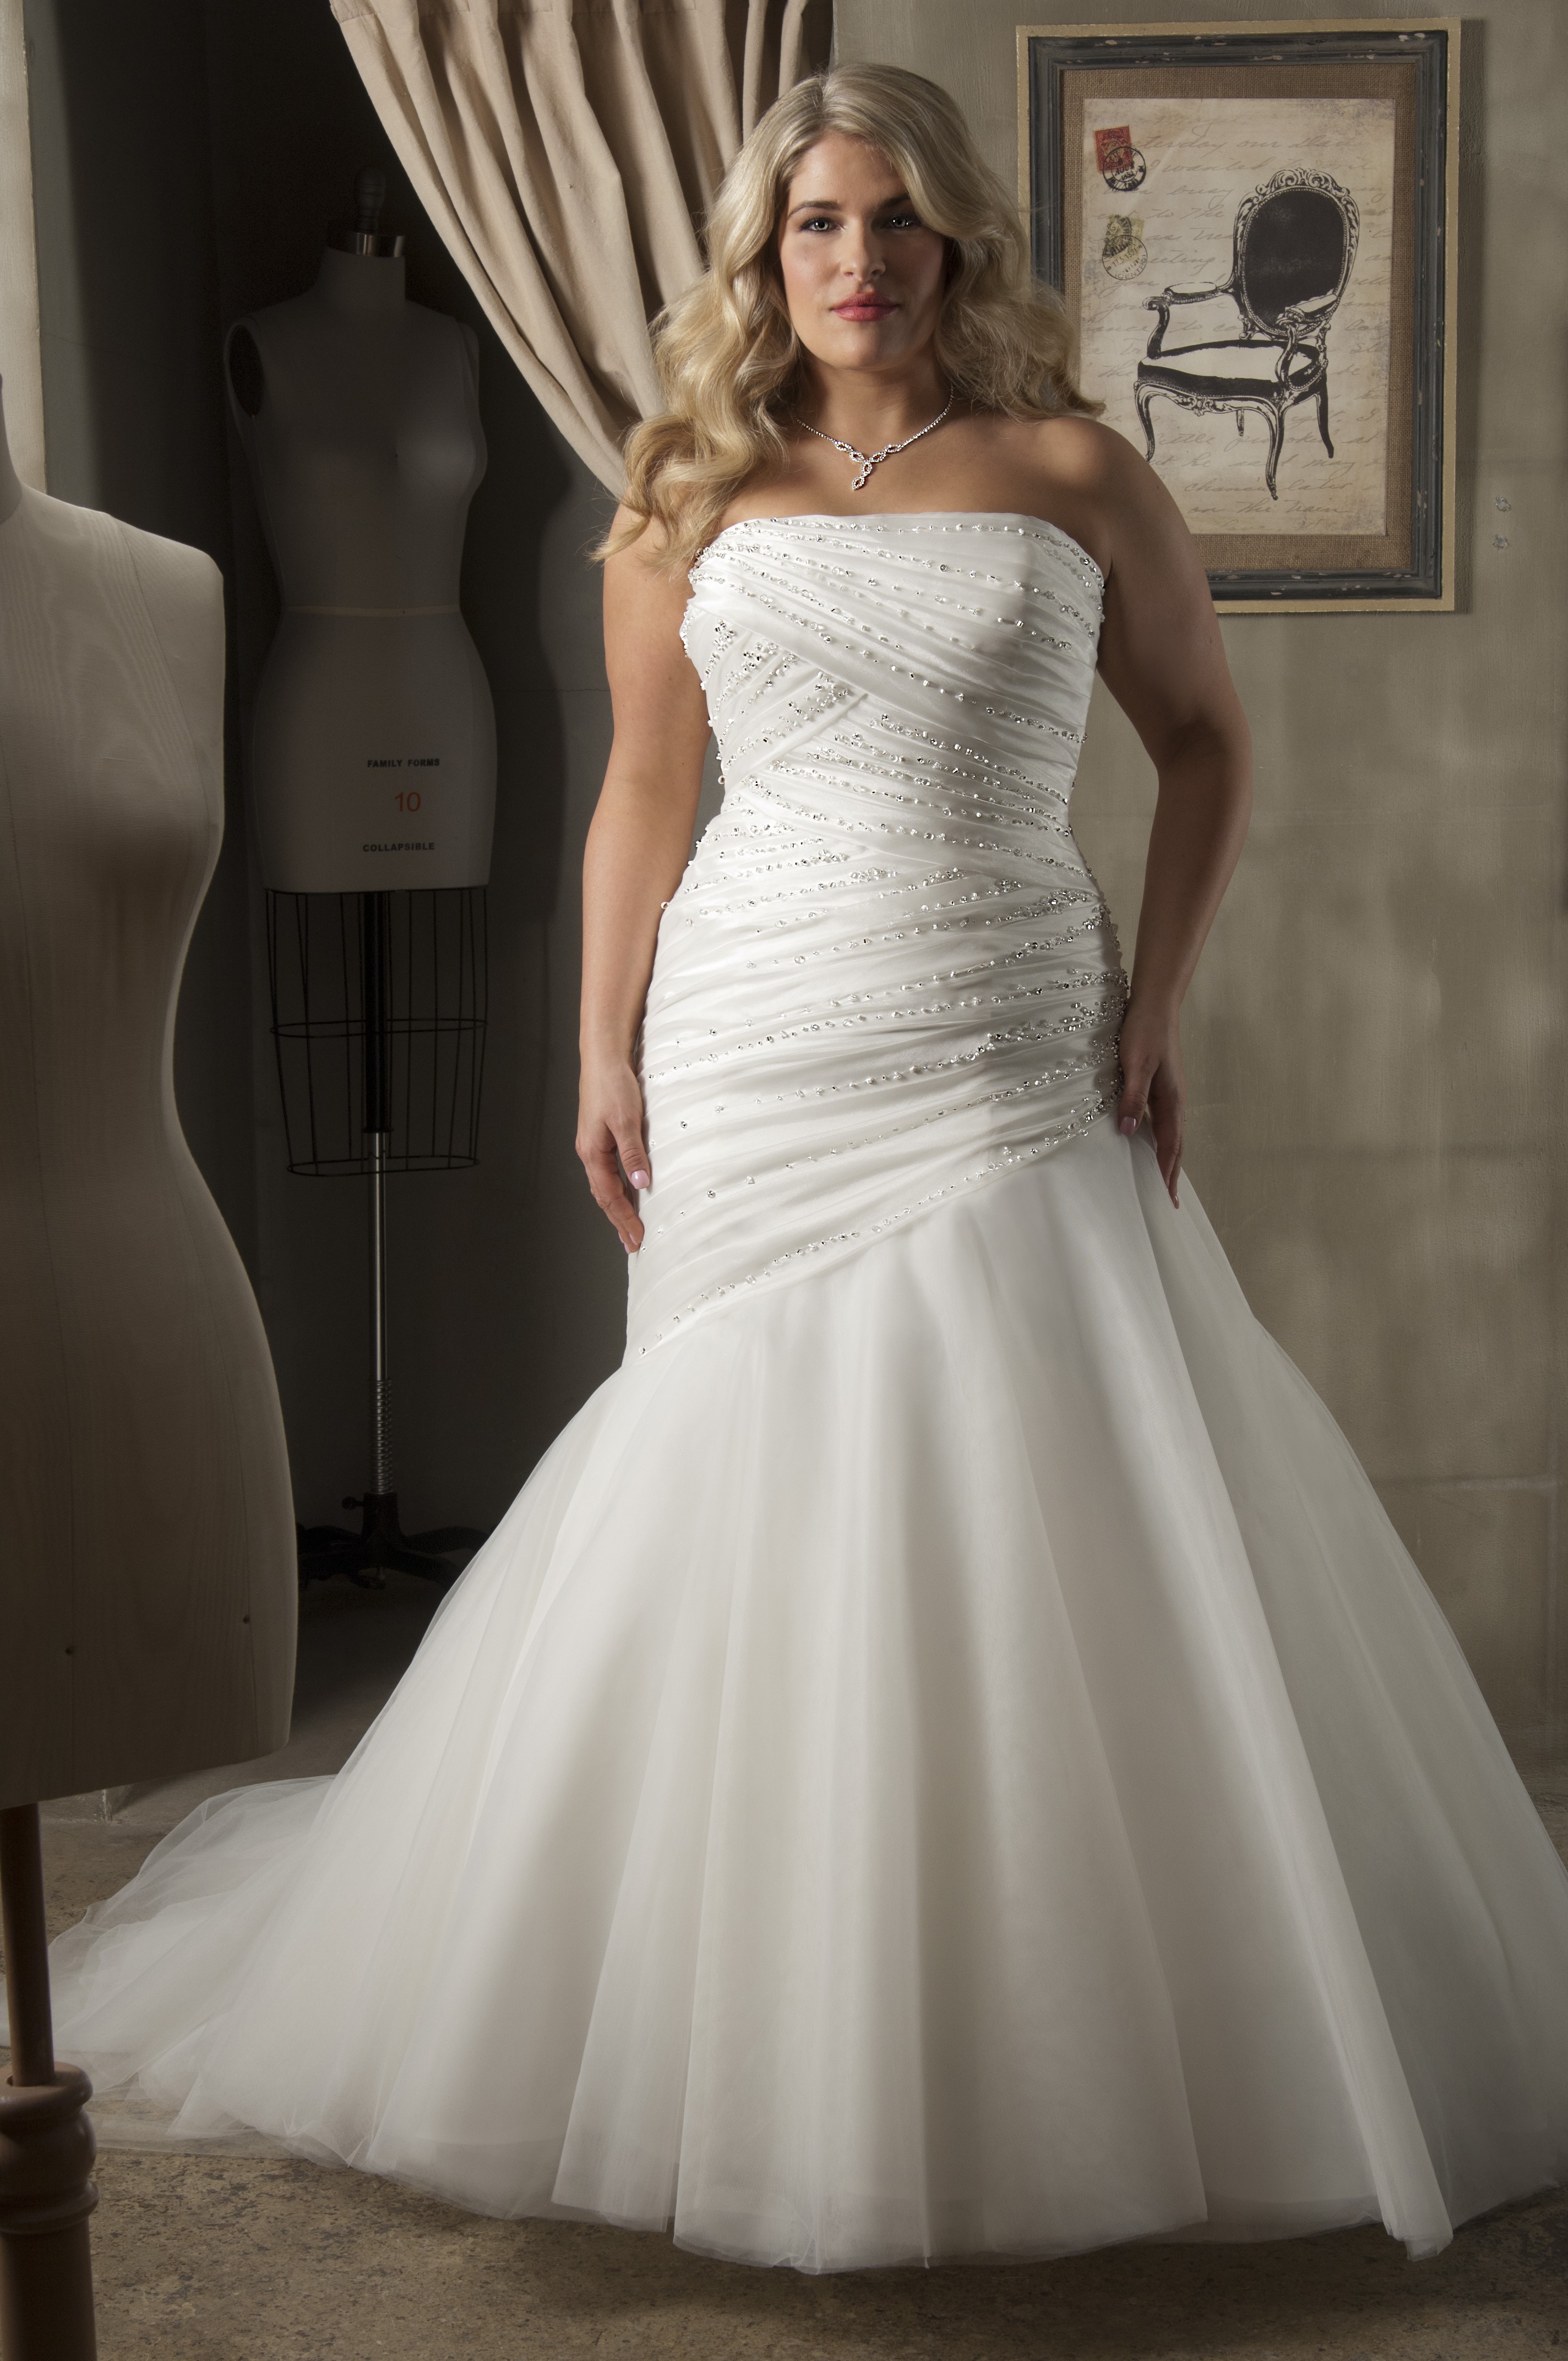 Wedding Reception Dresses Plus Size of all time Don t miss out ...